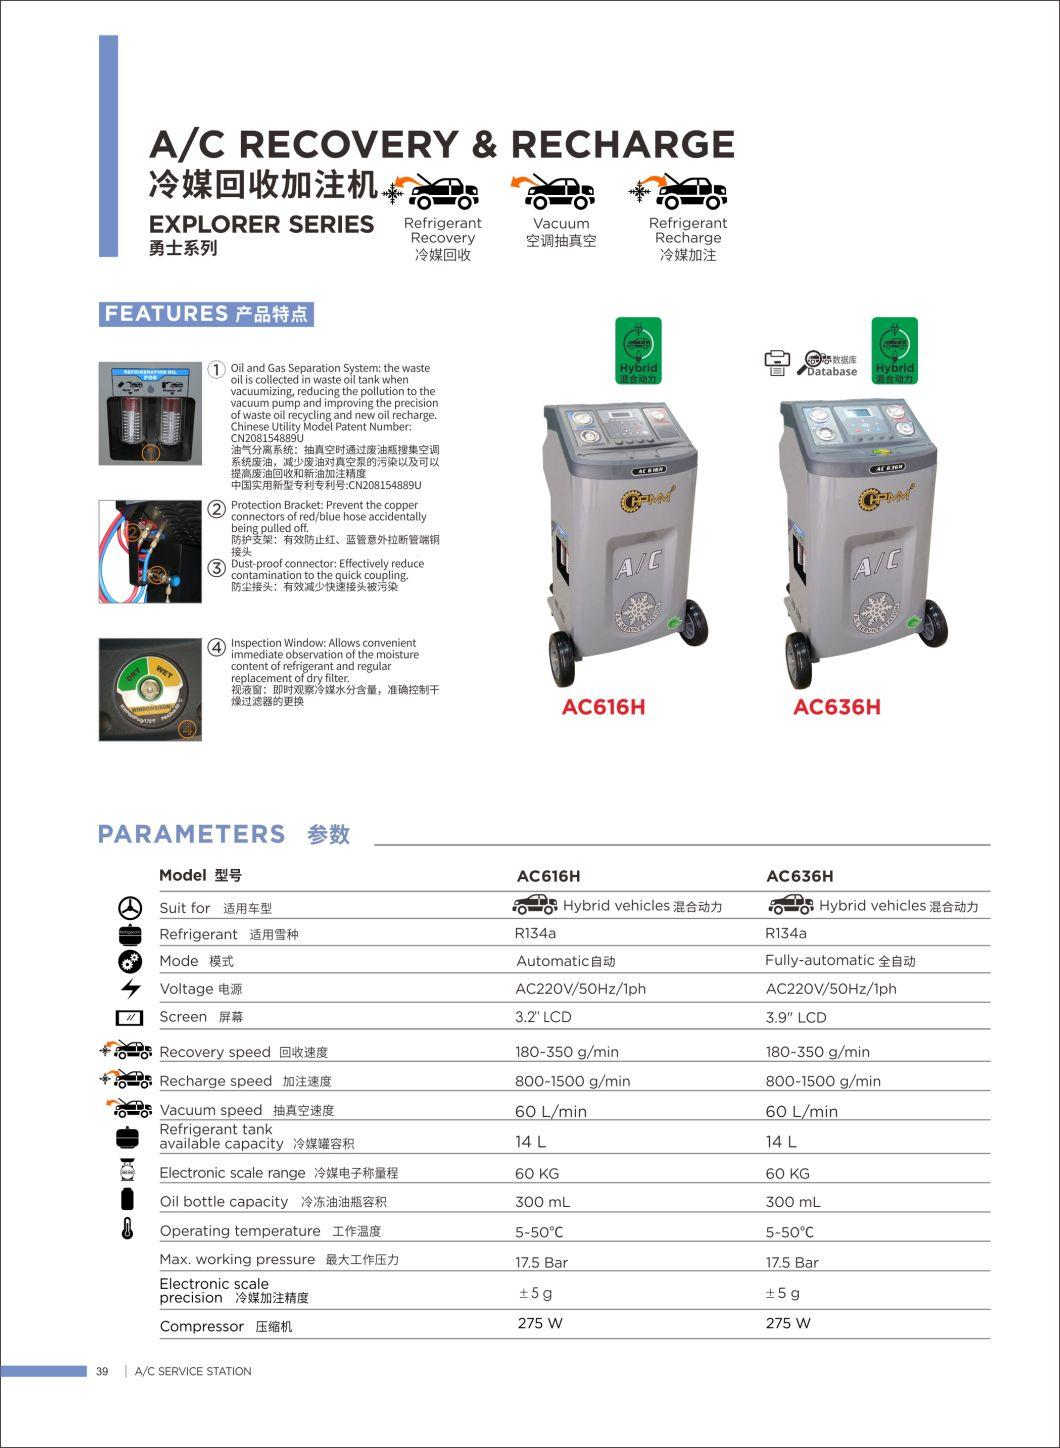 A/C Recovery Machines AC616h A/C Recover, Recycle and Recharge Machine AC R134A Refrigerant Equipment